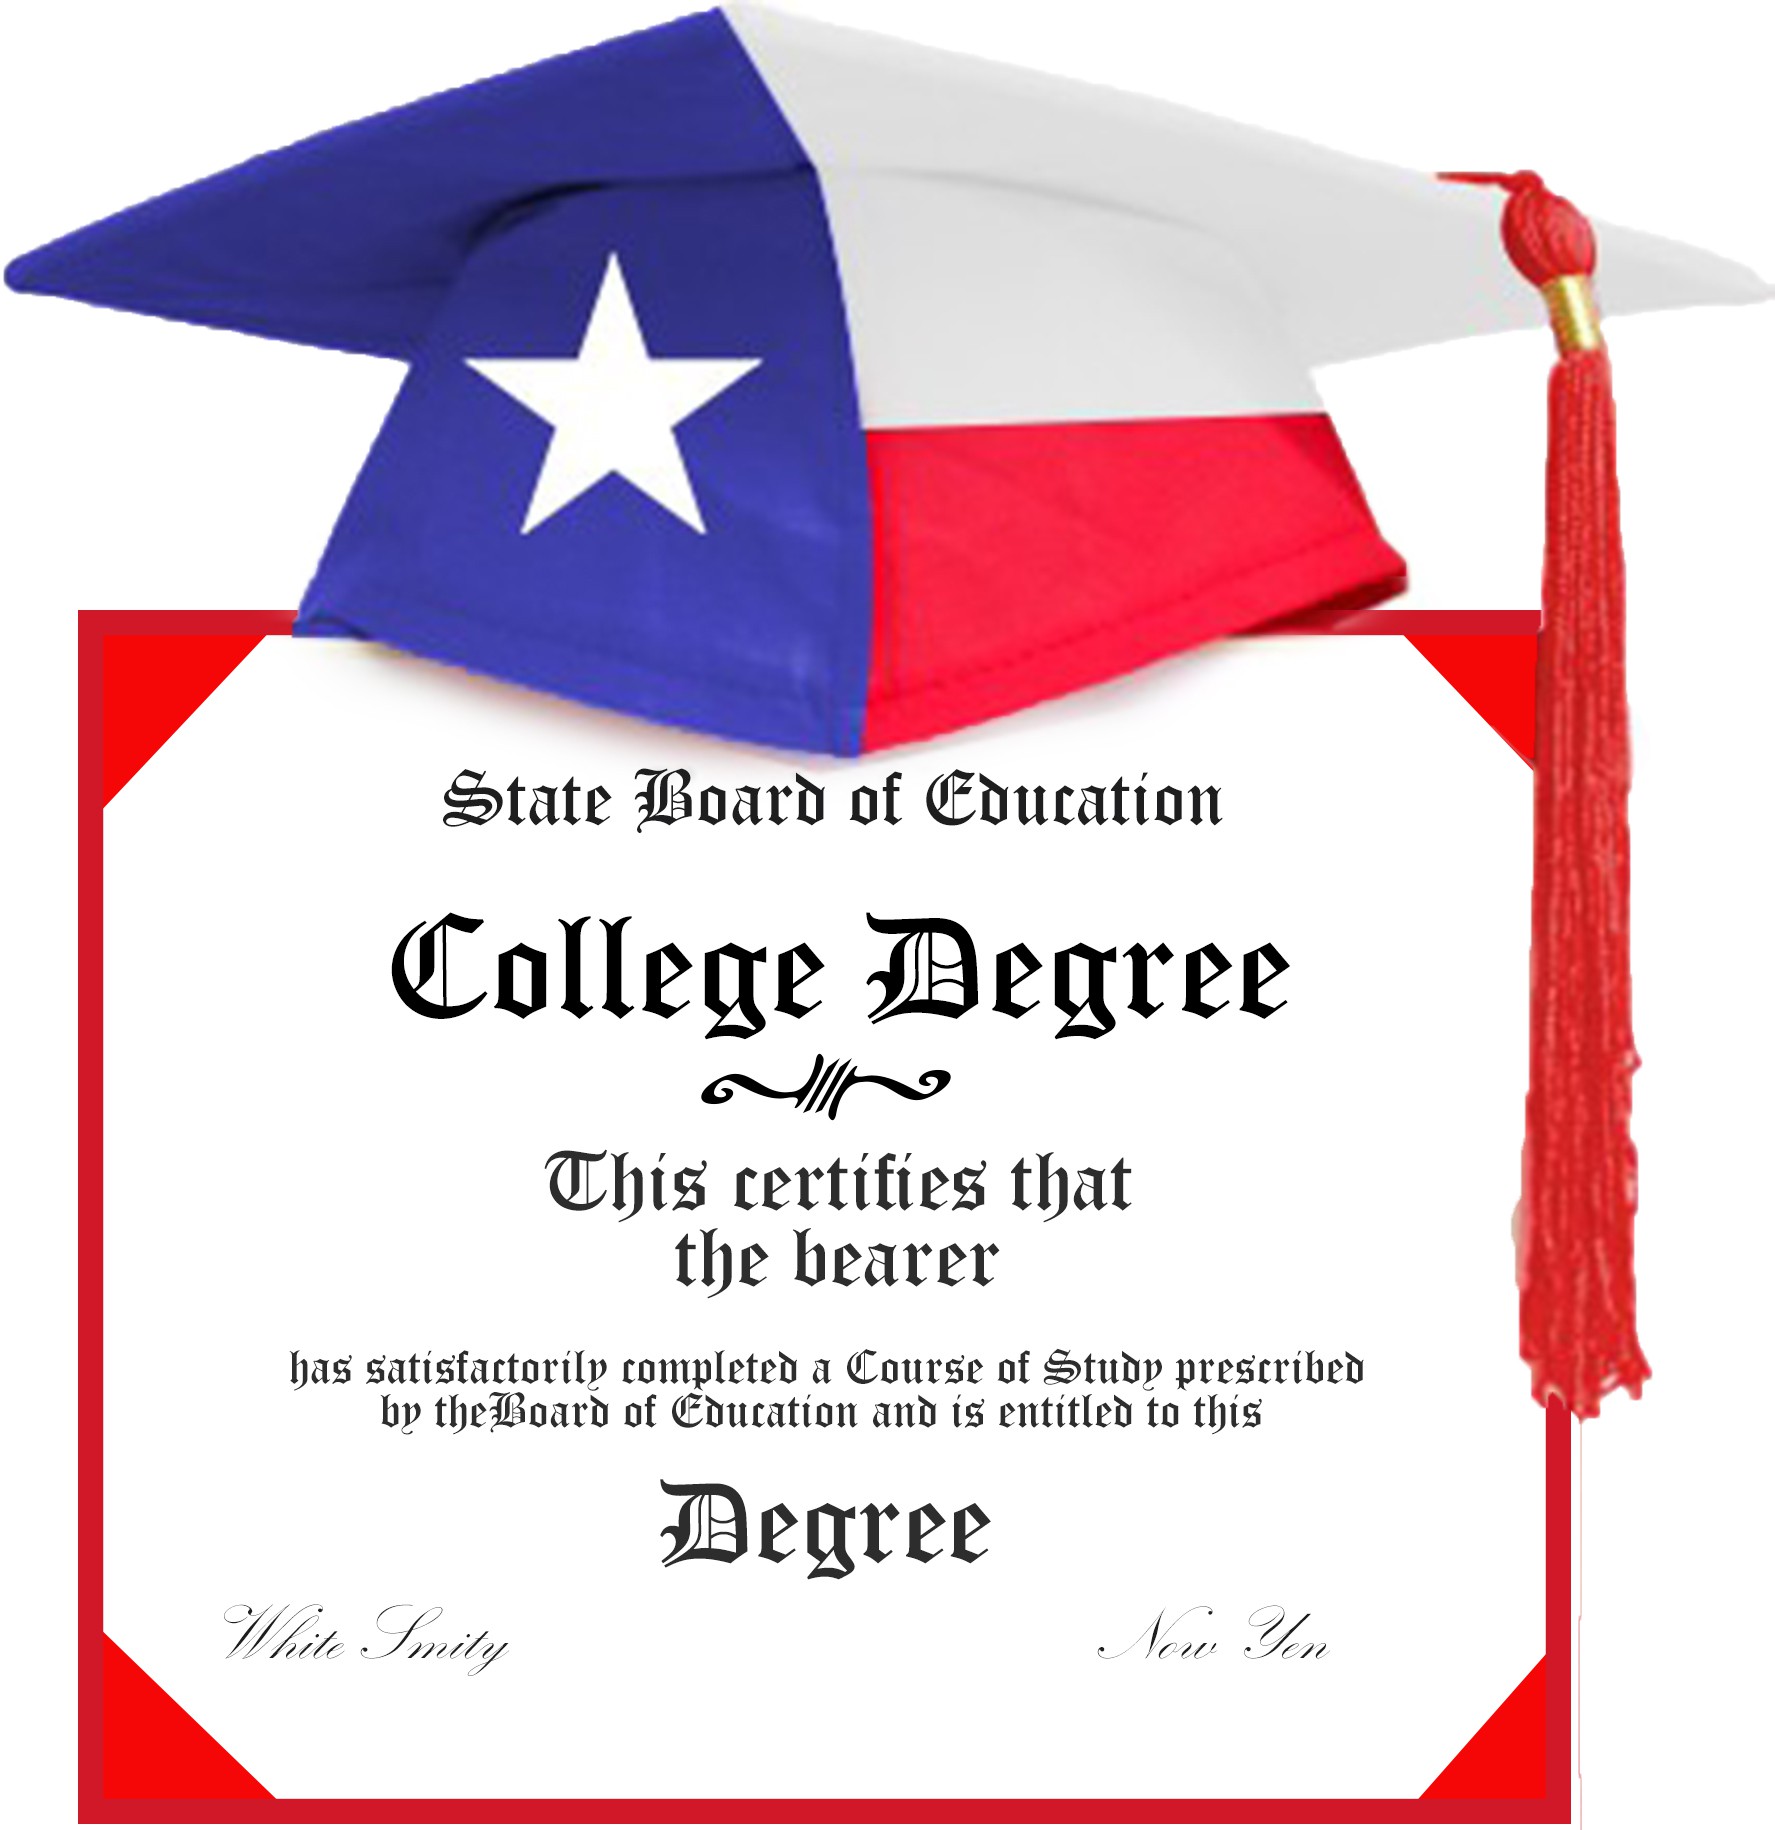 The University of Texas at El Paso College Degree